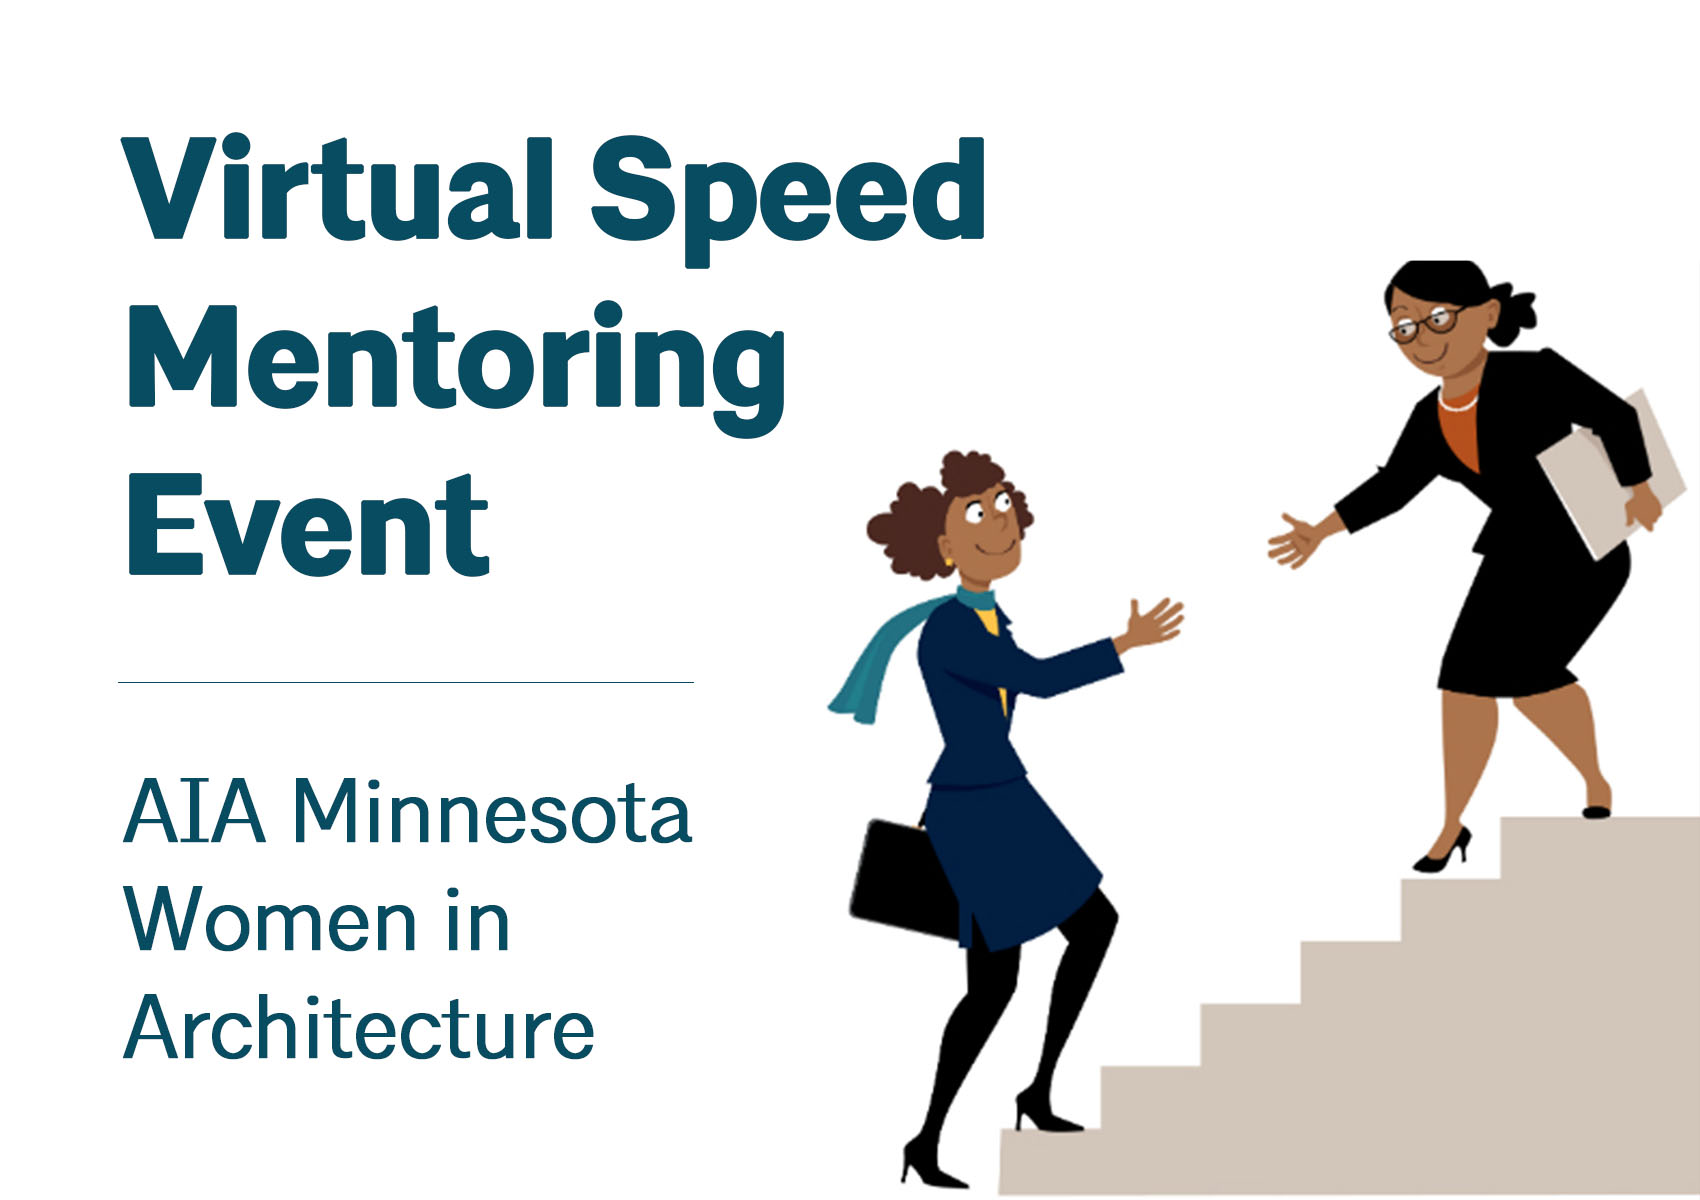 Women in Architecture Virtual Speed Mentoring